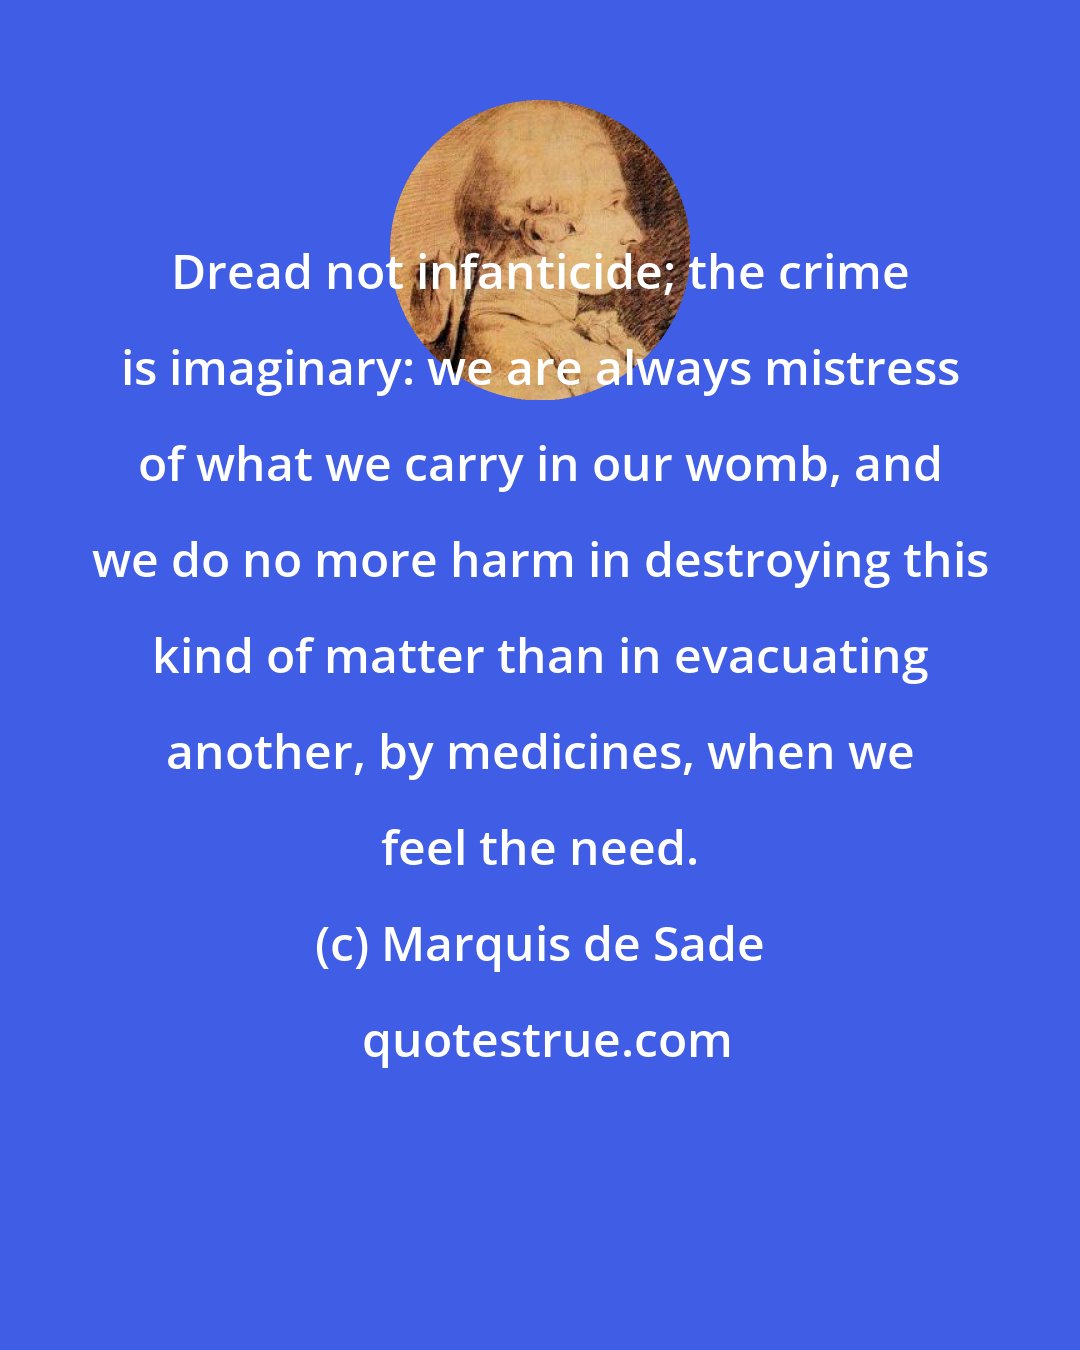 Marquis de Sade: Dread not infanticide; the crime is imaginary: we are always mistress of what we carry in our womb, and we do no more harm in destroying this kind of matter than in evacuating another, by medicines, when we feel the need.